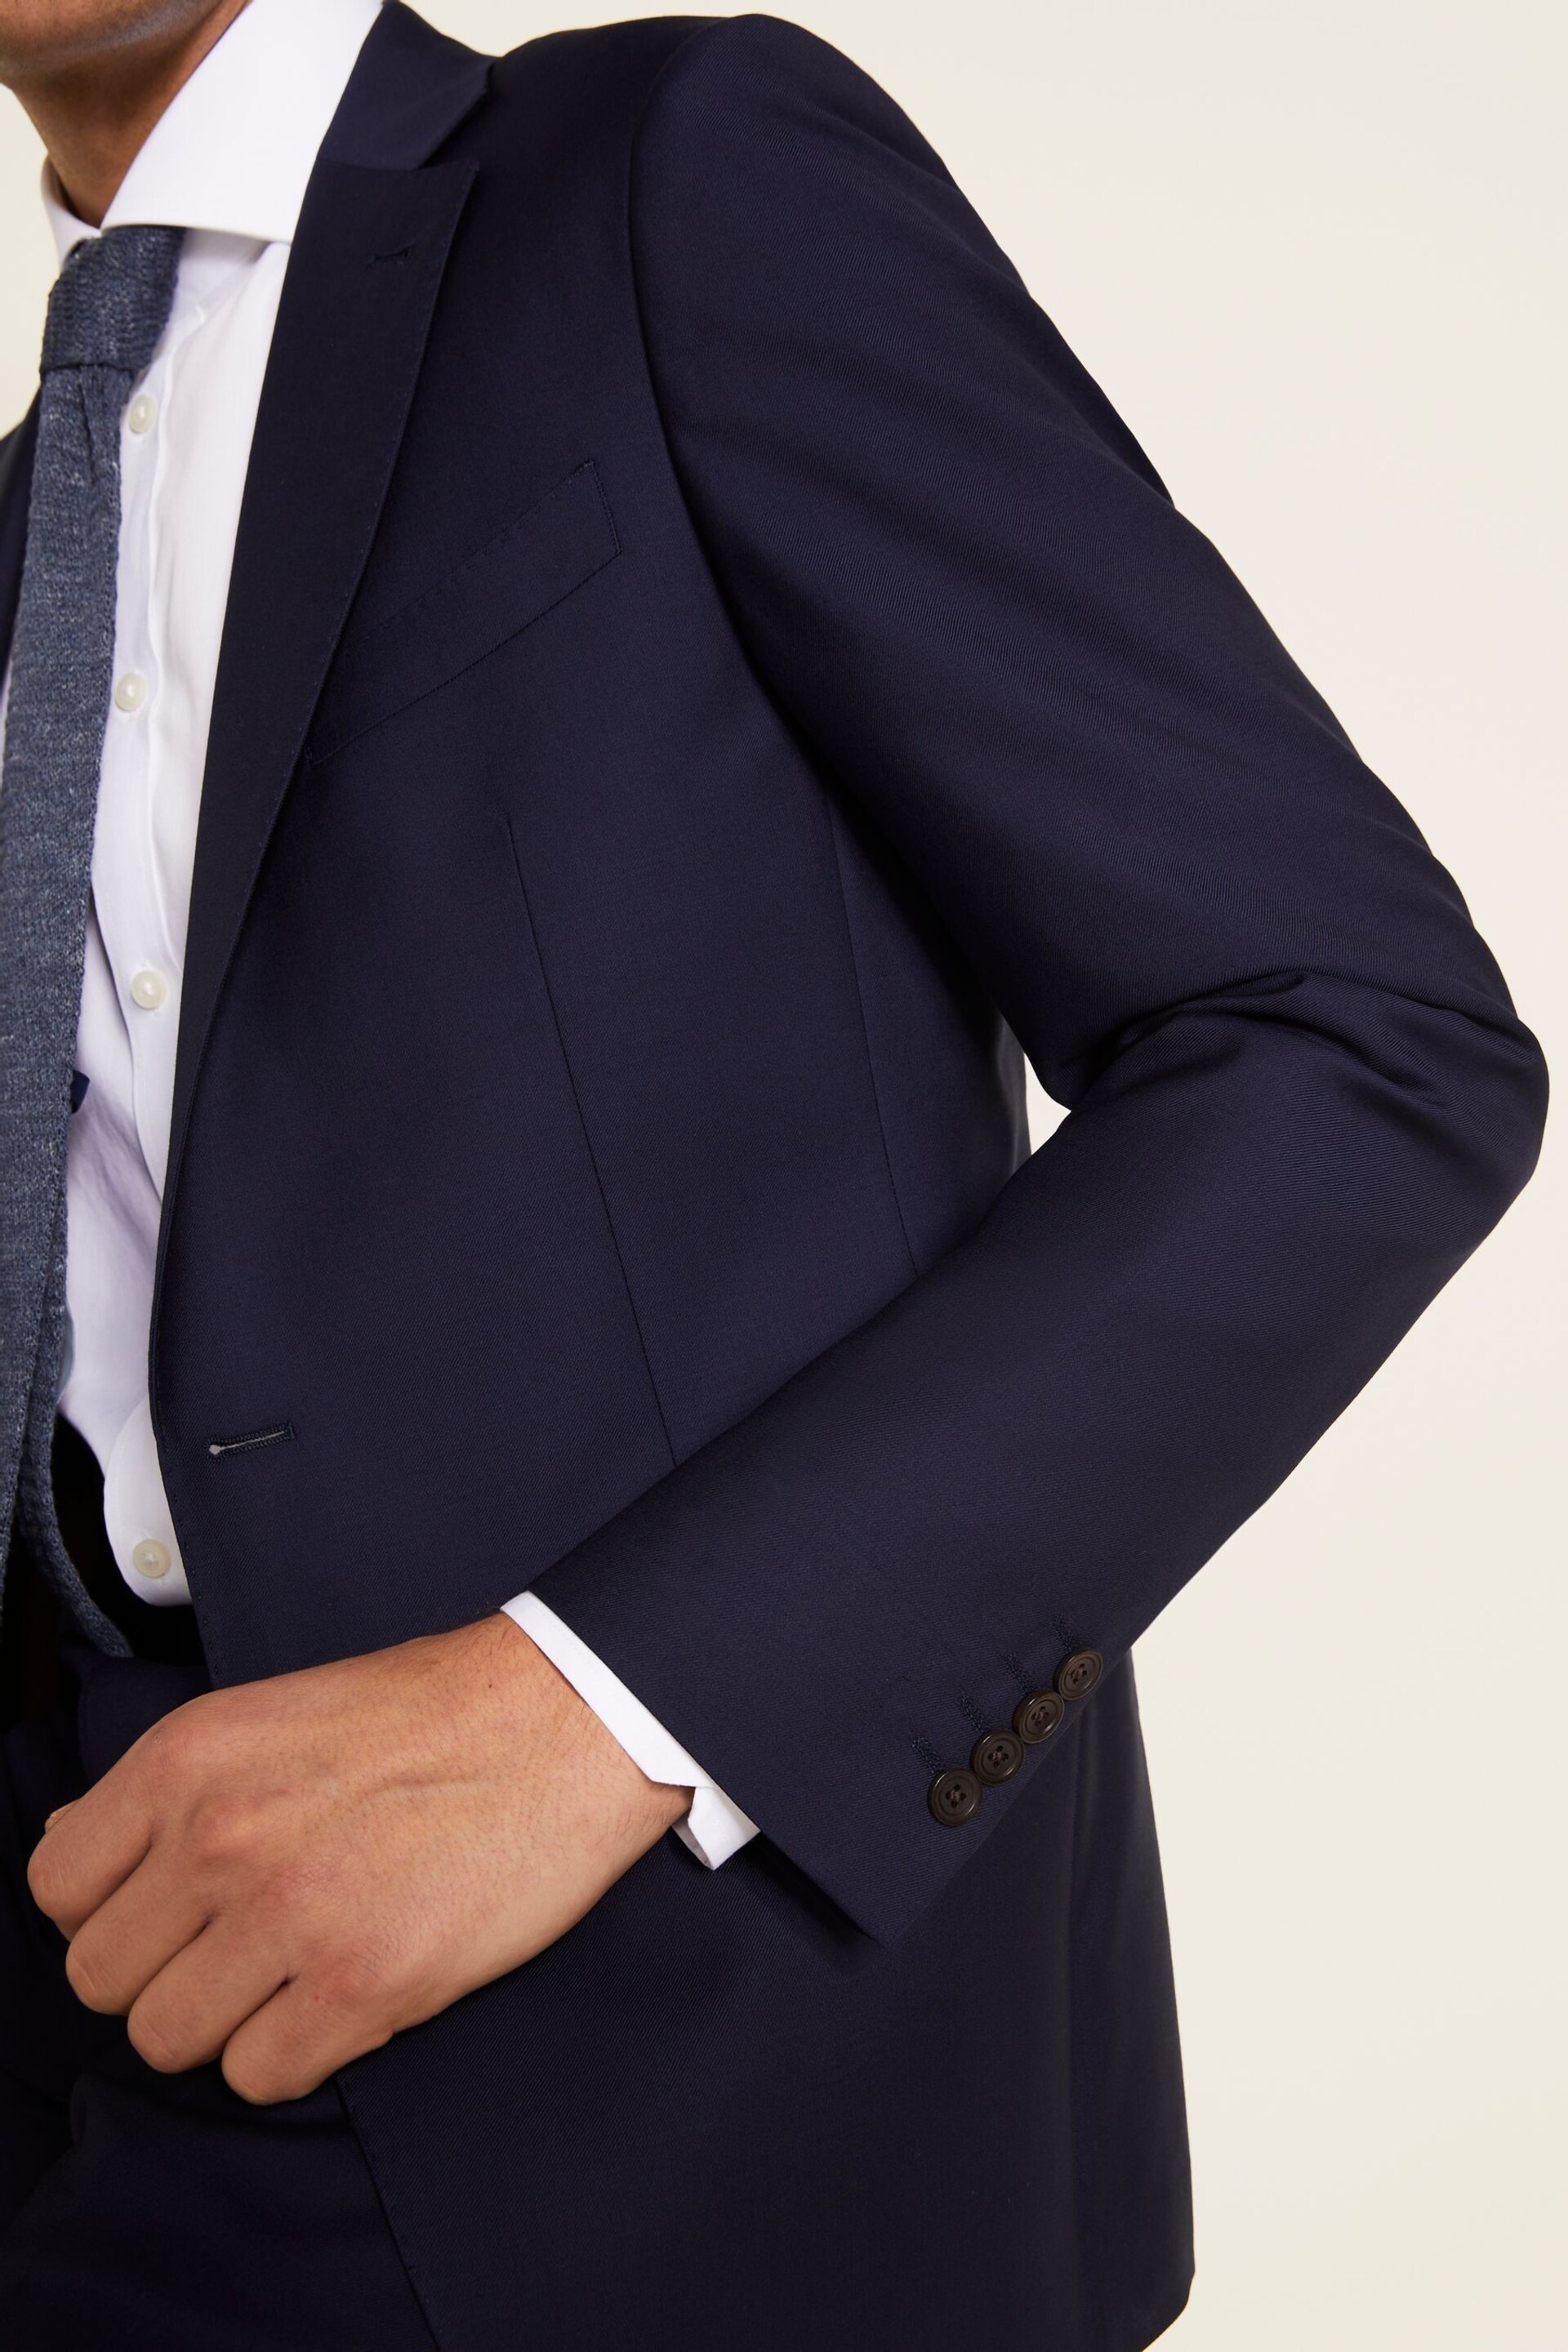 MOSS x Zenga Blue Tailored Fit Naples Jacket - Image 5 of 6